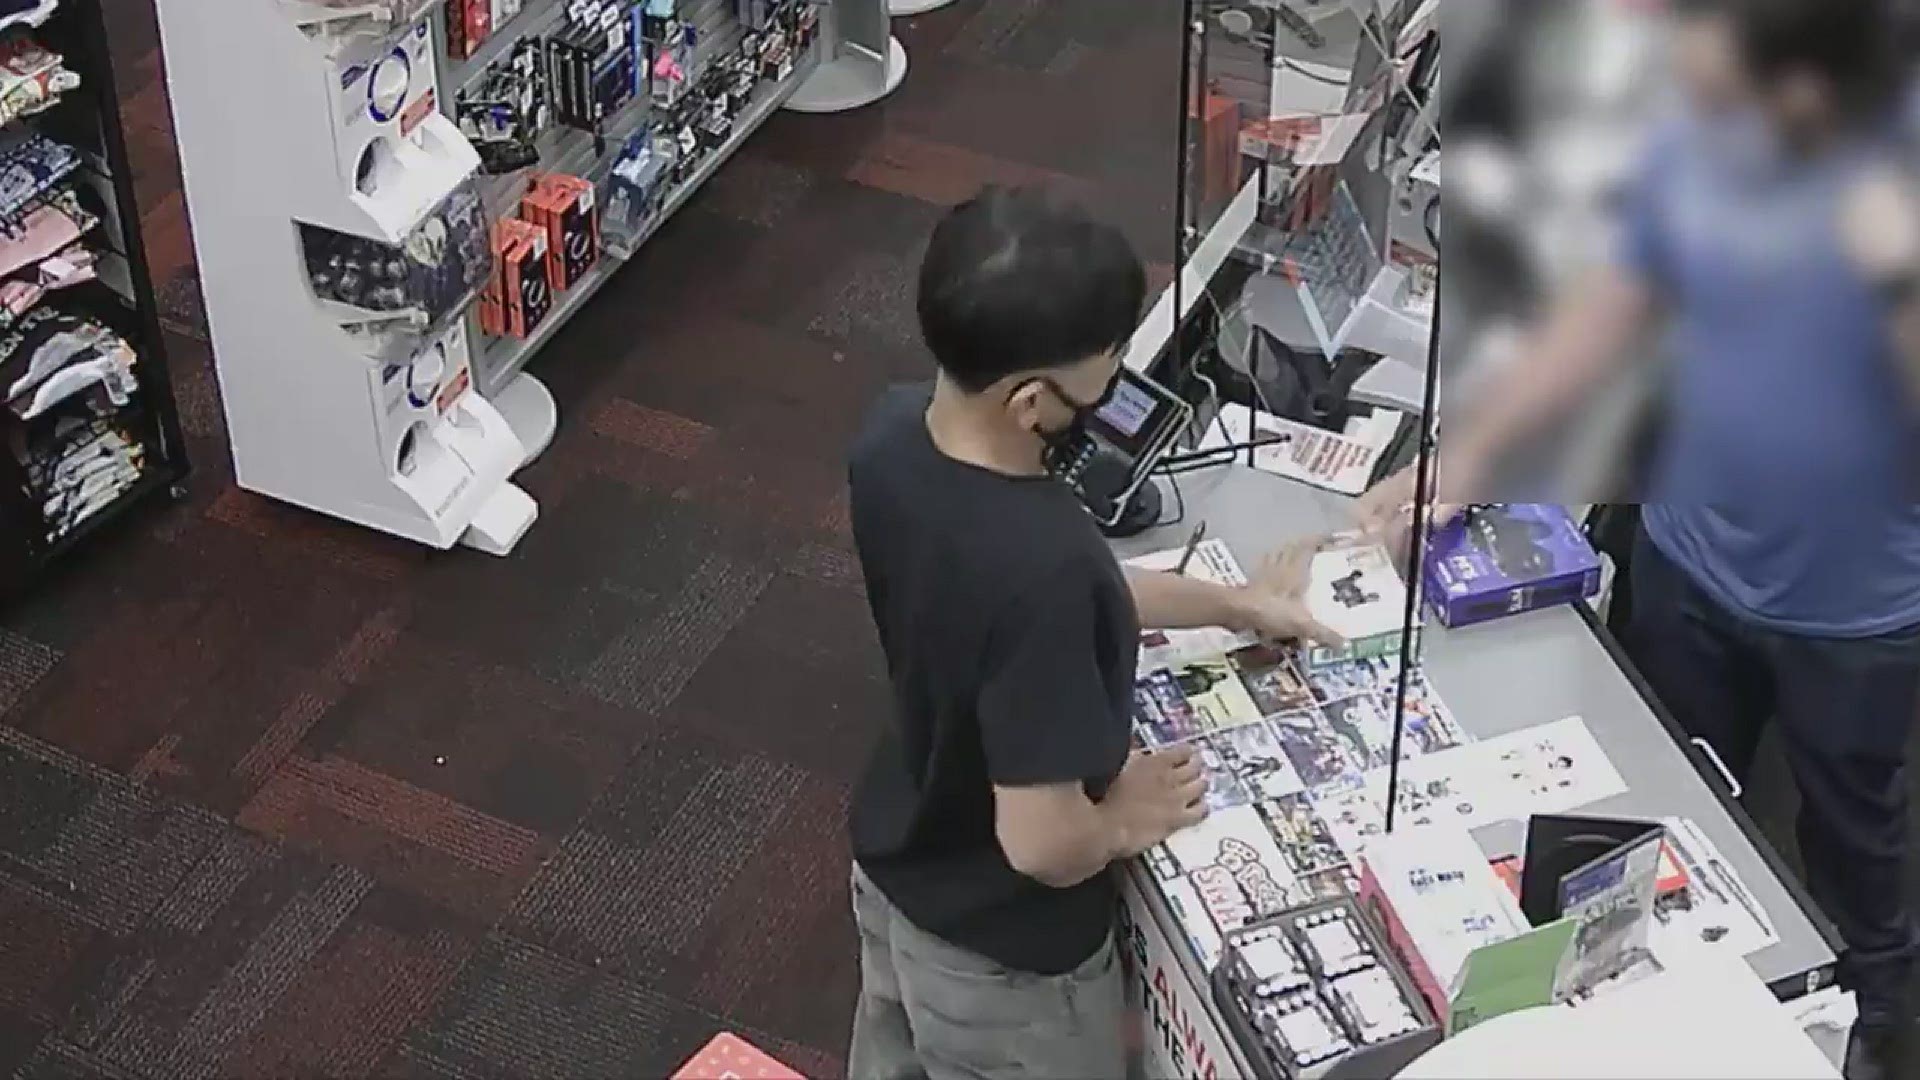 Houston police are looking for a suspect caught on camera stealing an Xbox controller from a GameStop employee in southeast Houston.